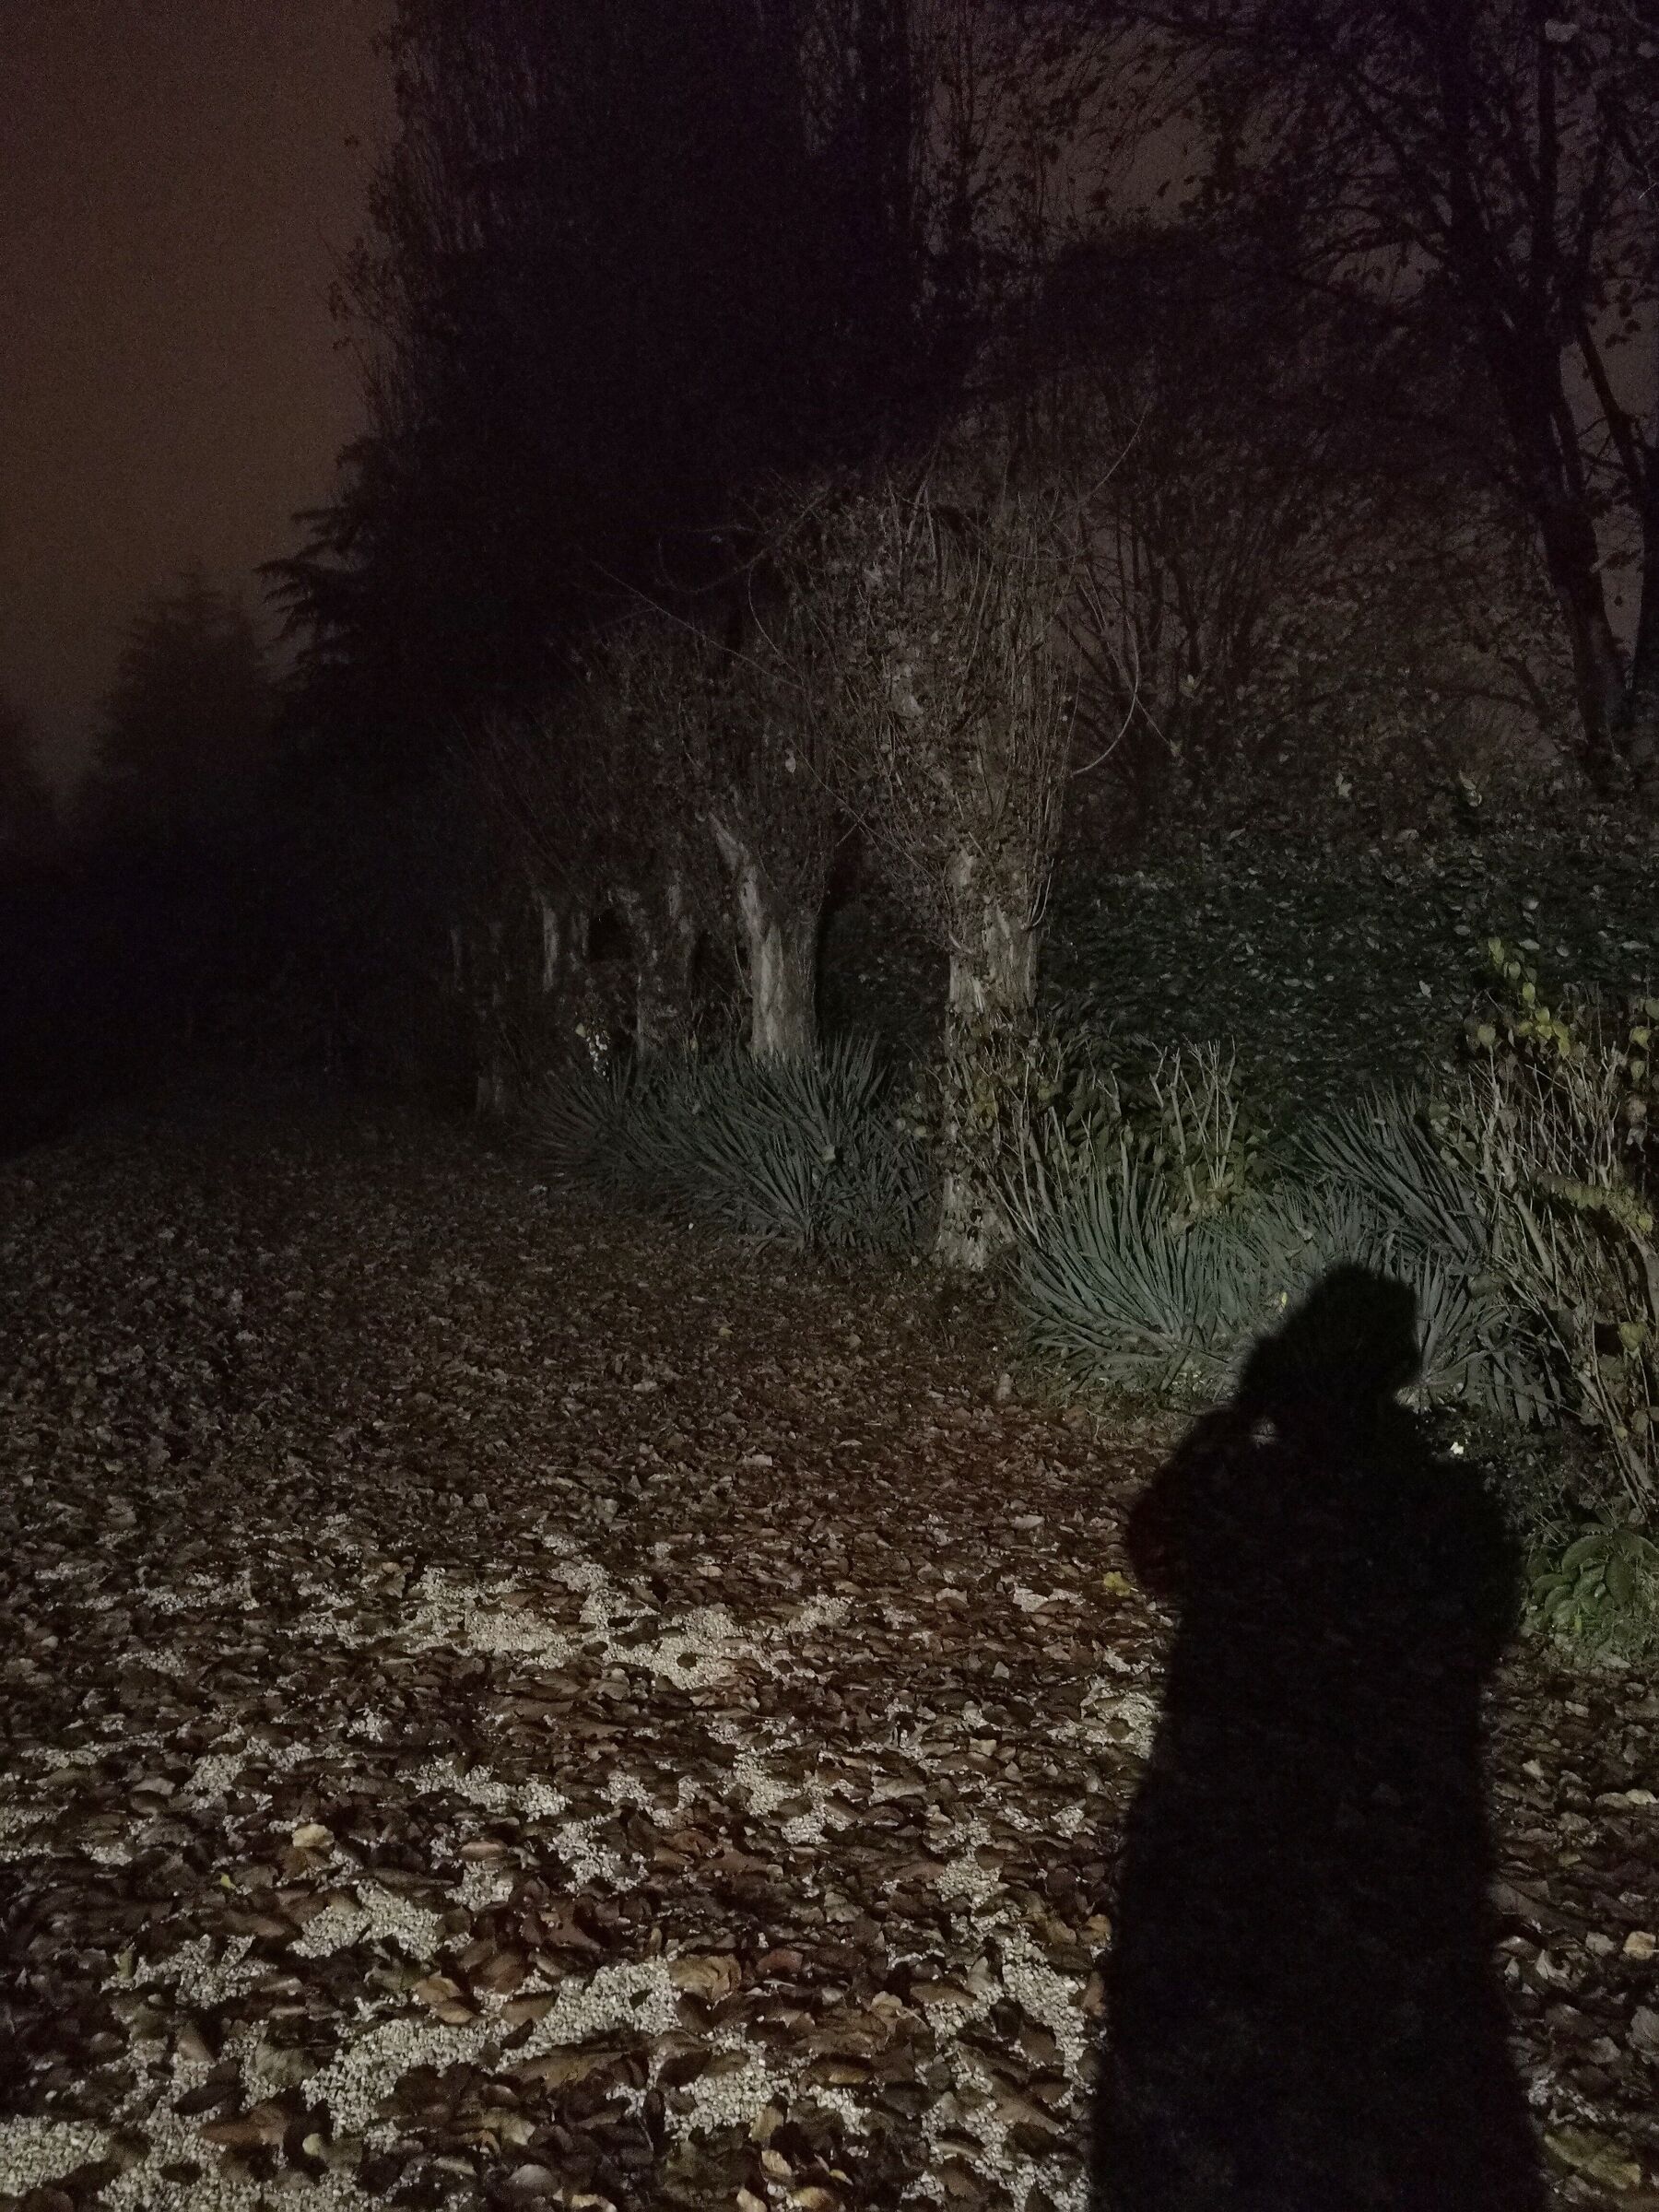 My shadow photographing a tree-lined avenue...